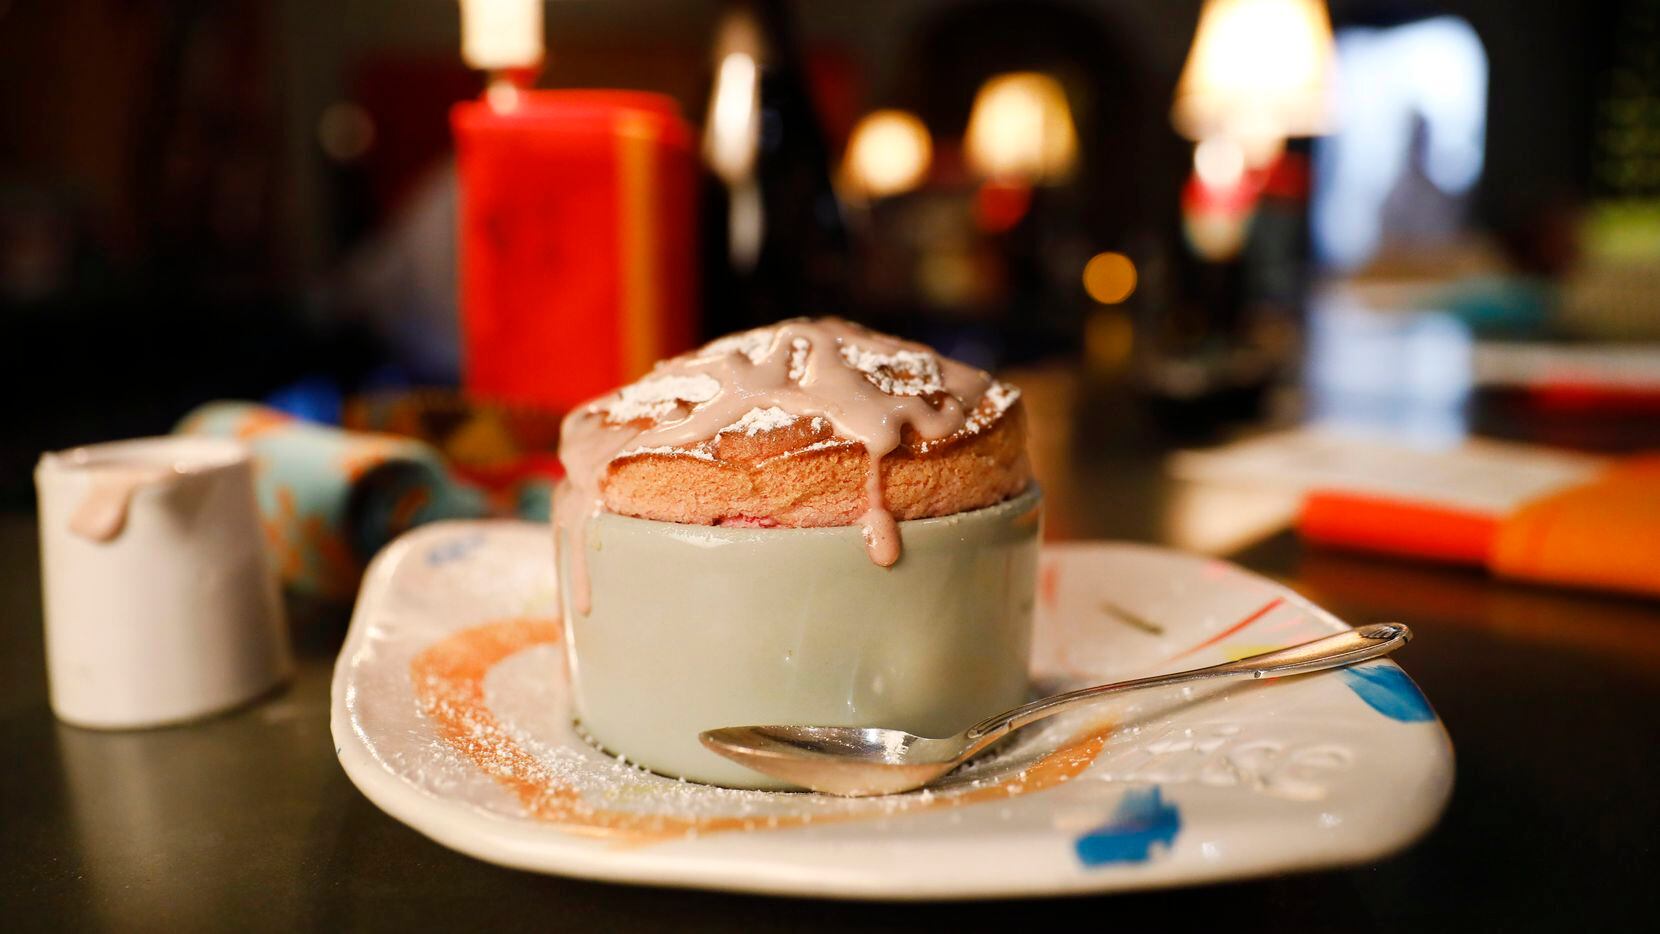 Soufflé restaurant Rise is expected to open its first Plano restaurant in fall 2023. The...